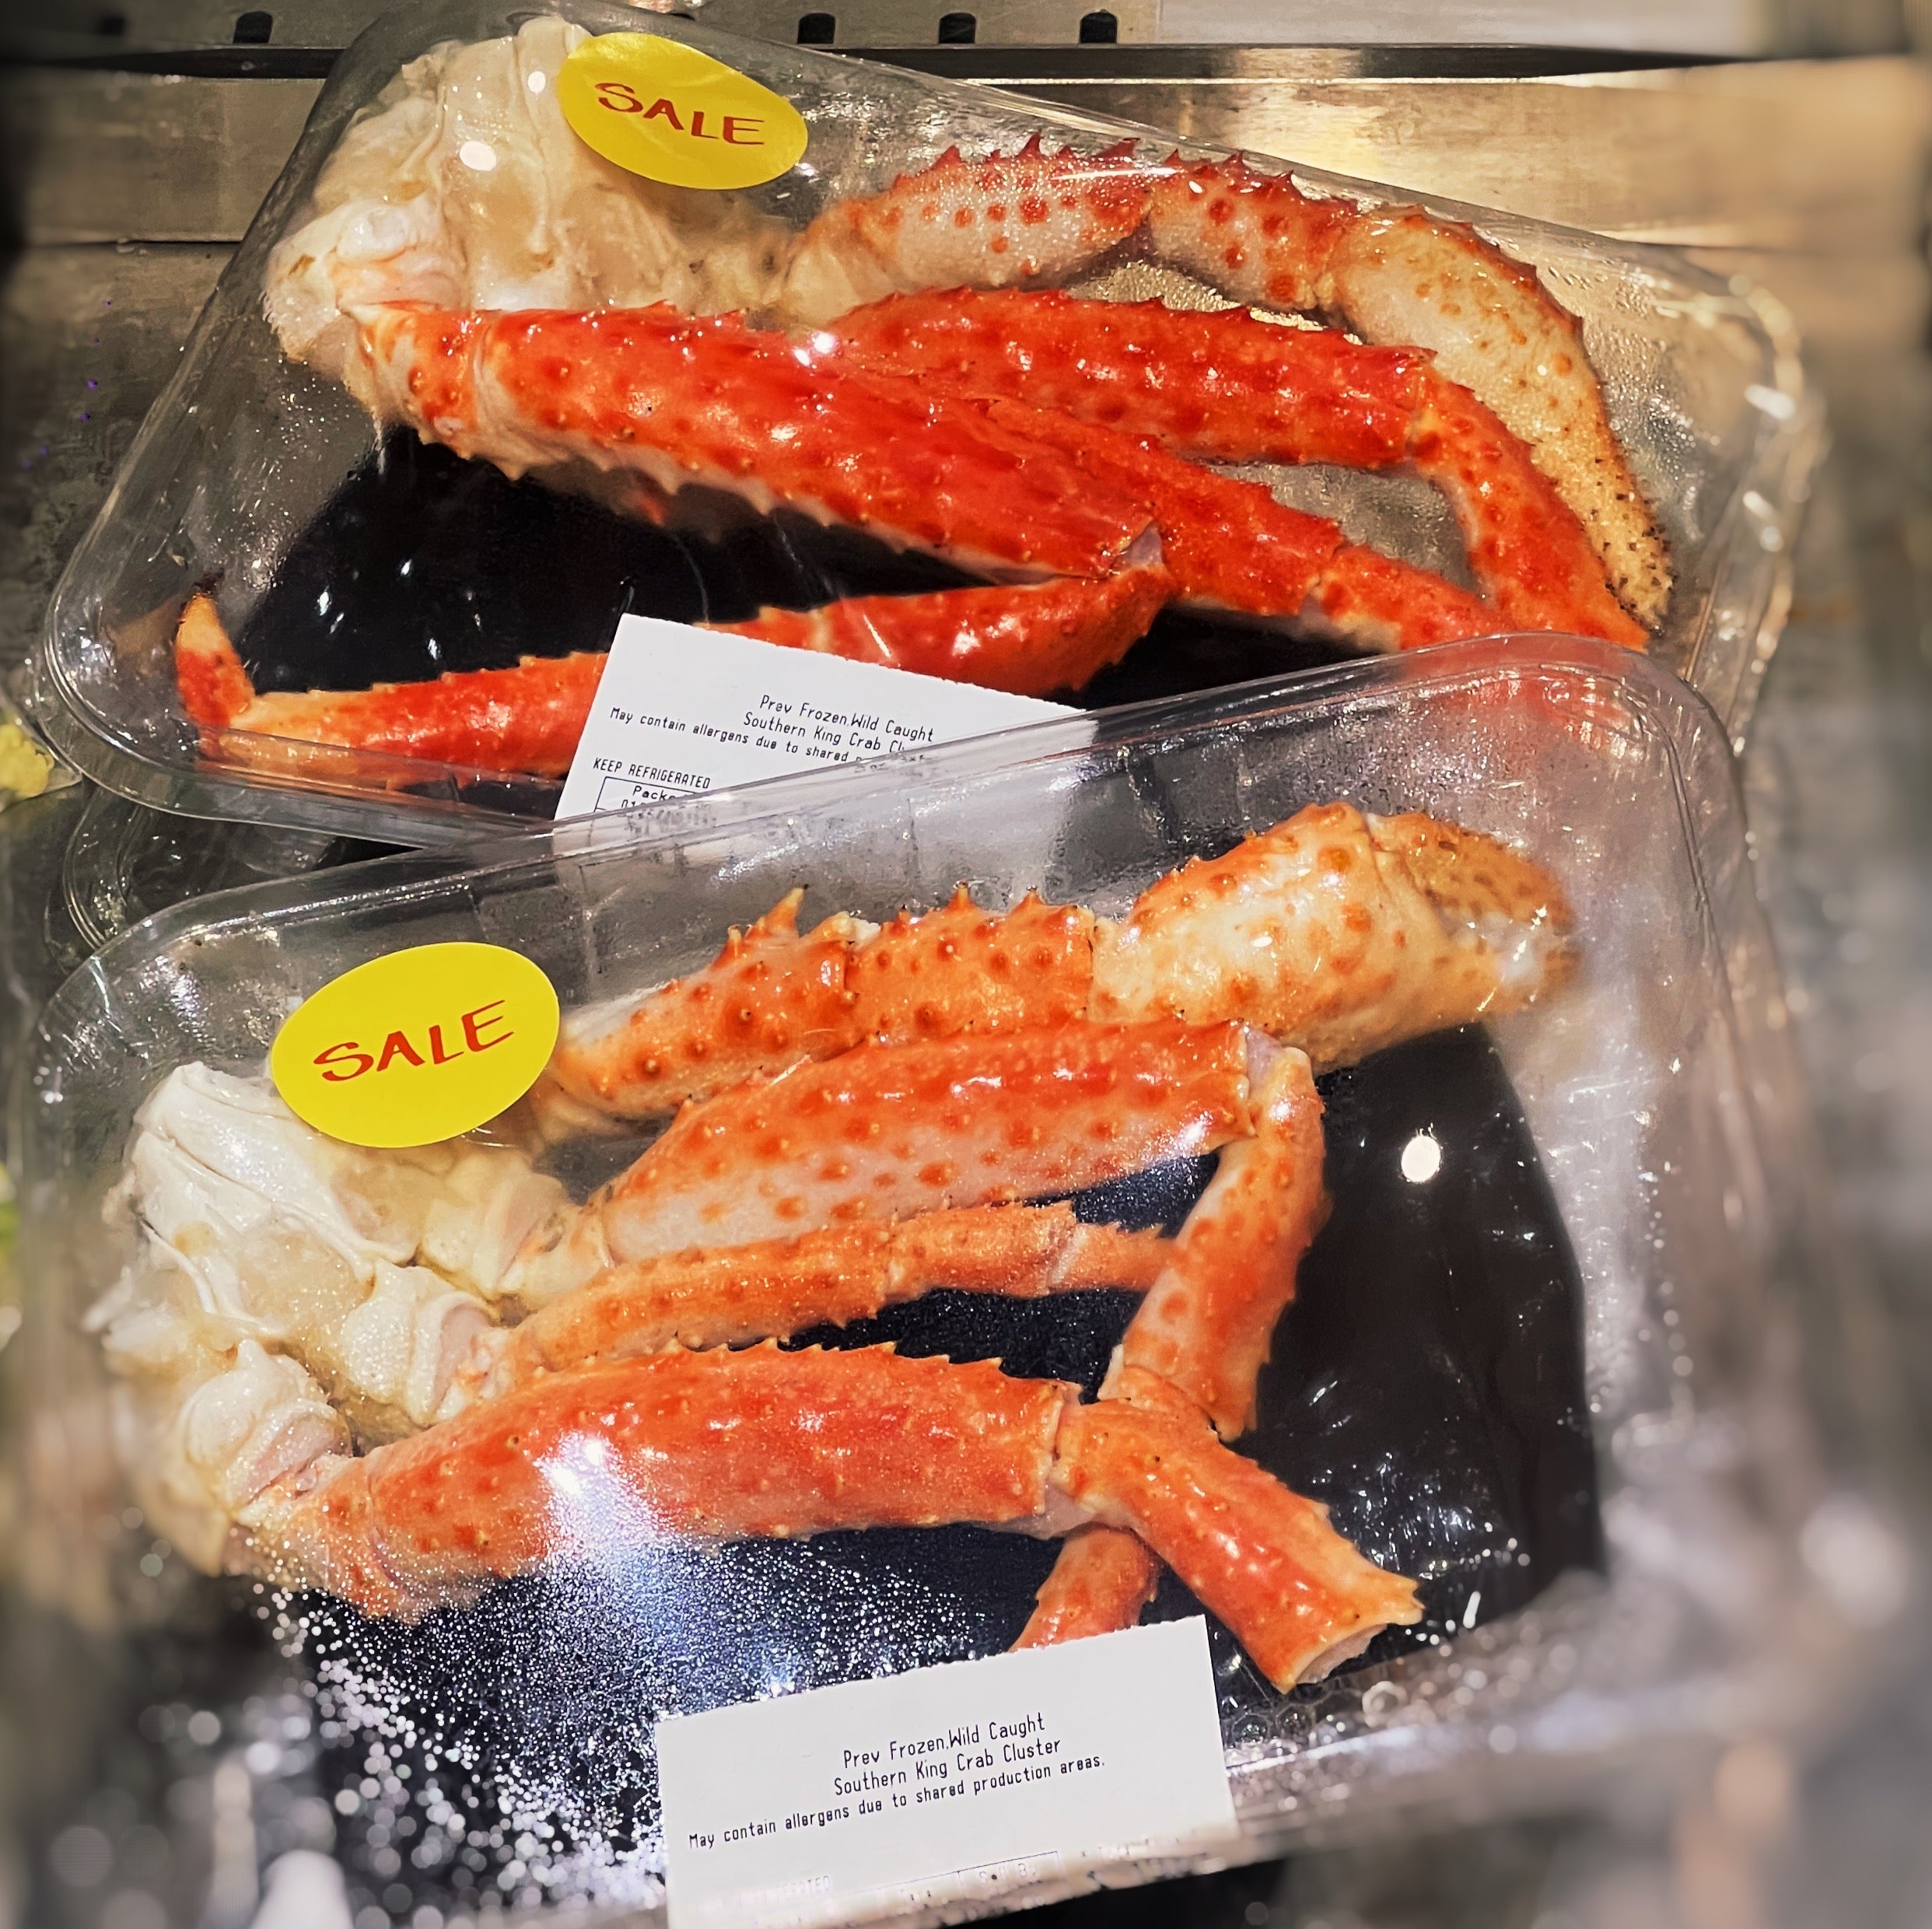 If Alaska Red King Crab Season is Closed, Why am I Still Seeing it at the Store and Restaurant Menus?